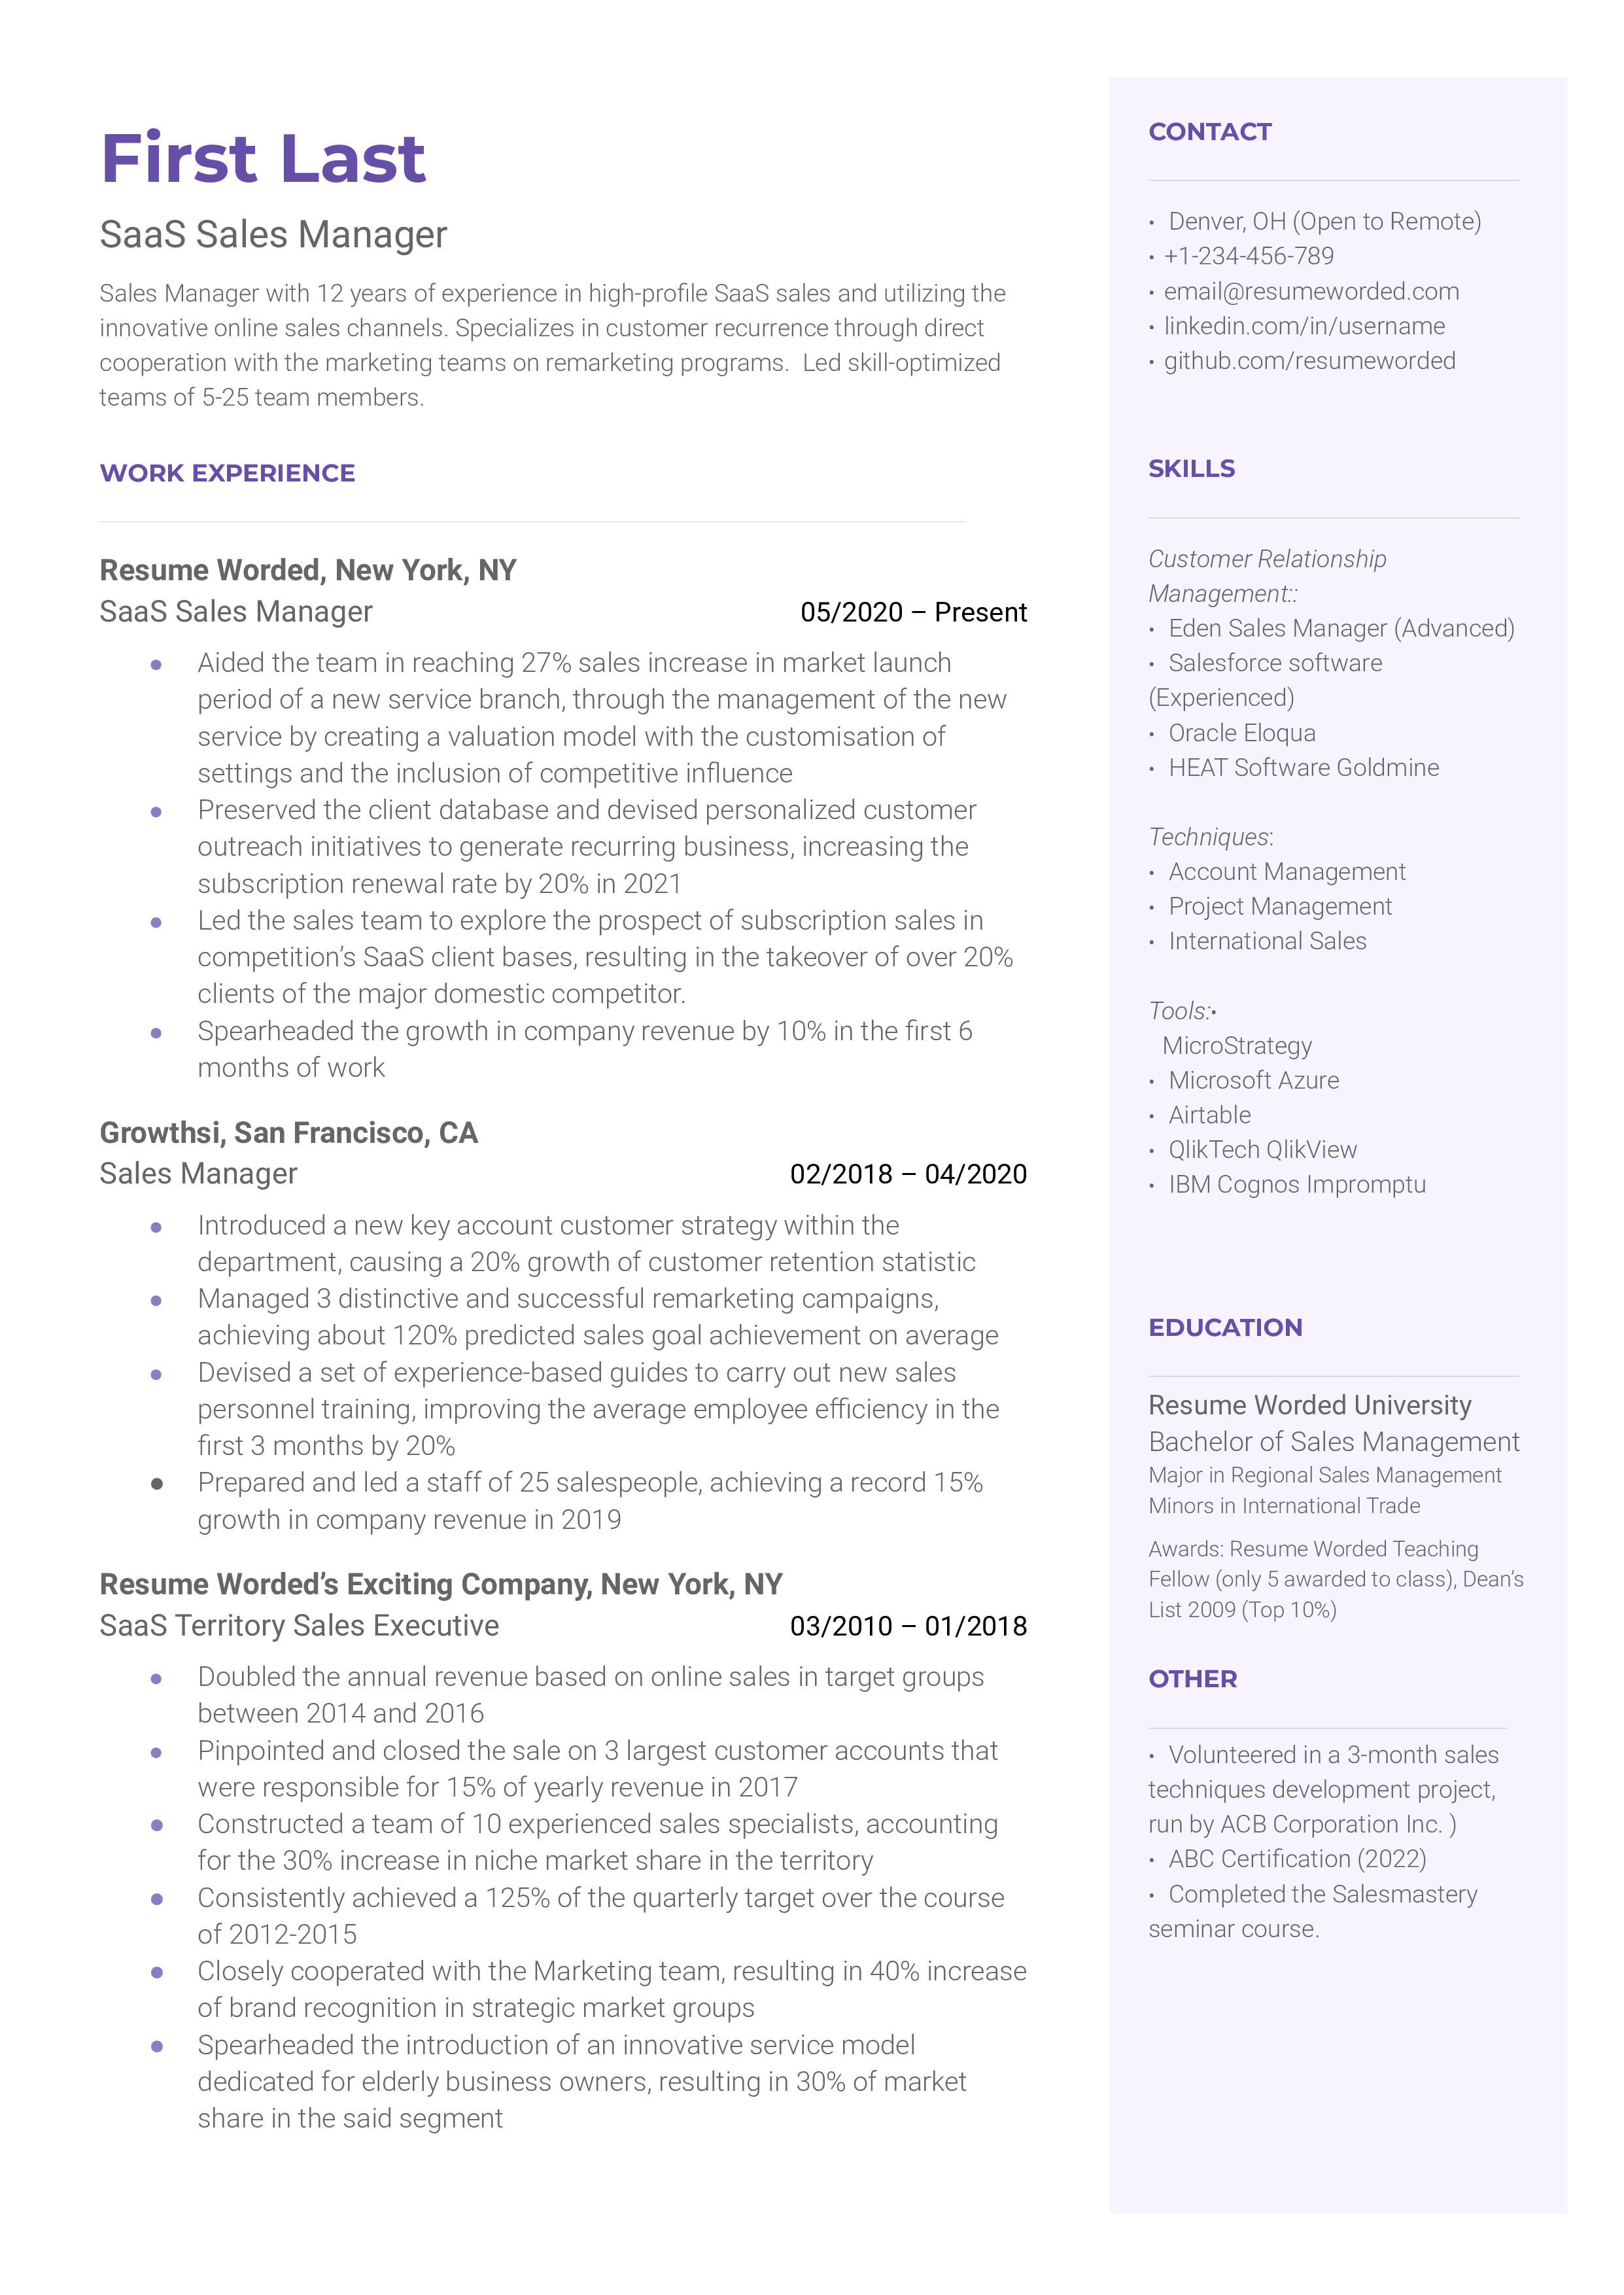 SaaS Sales Manager Resume Template + Example